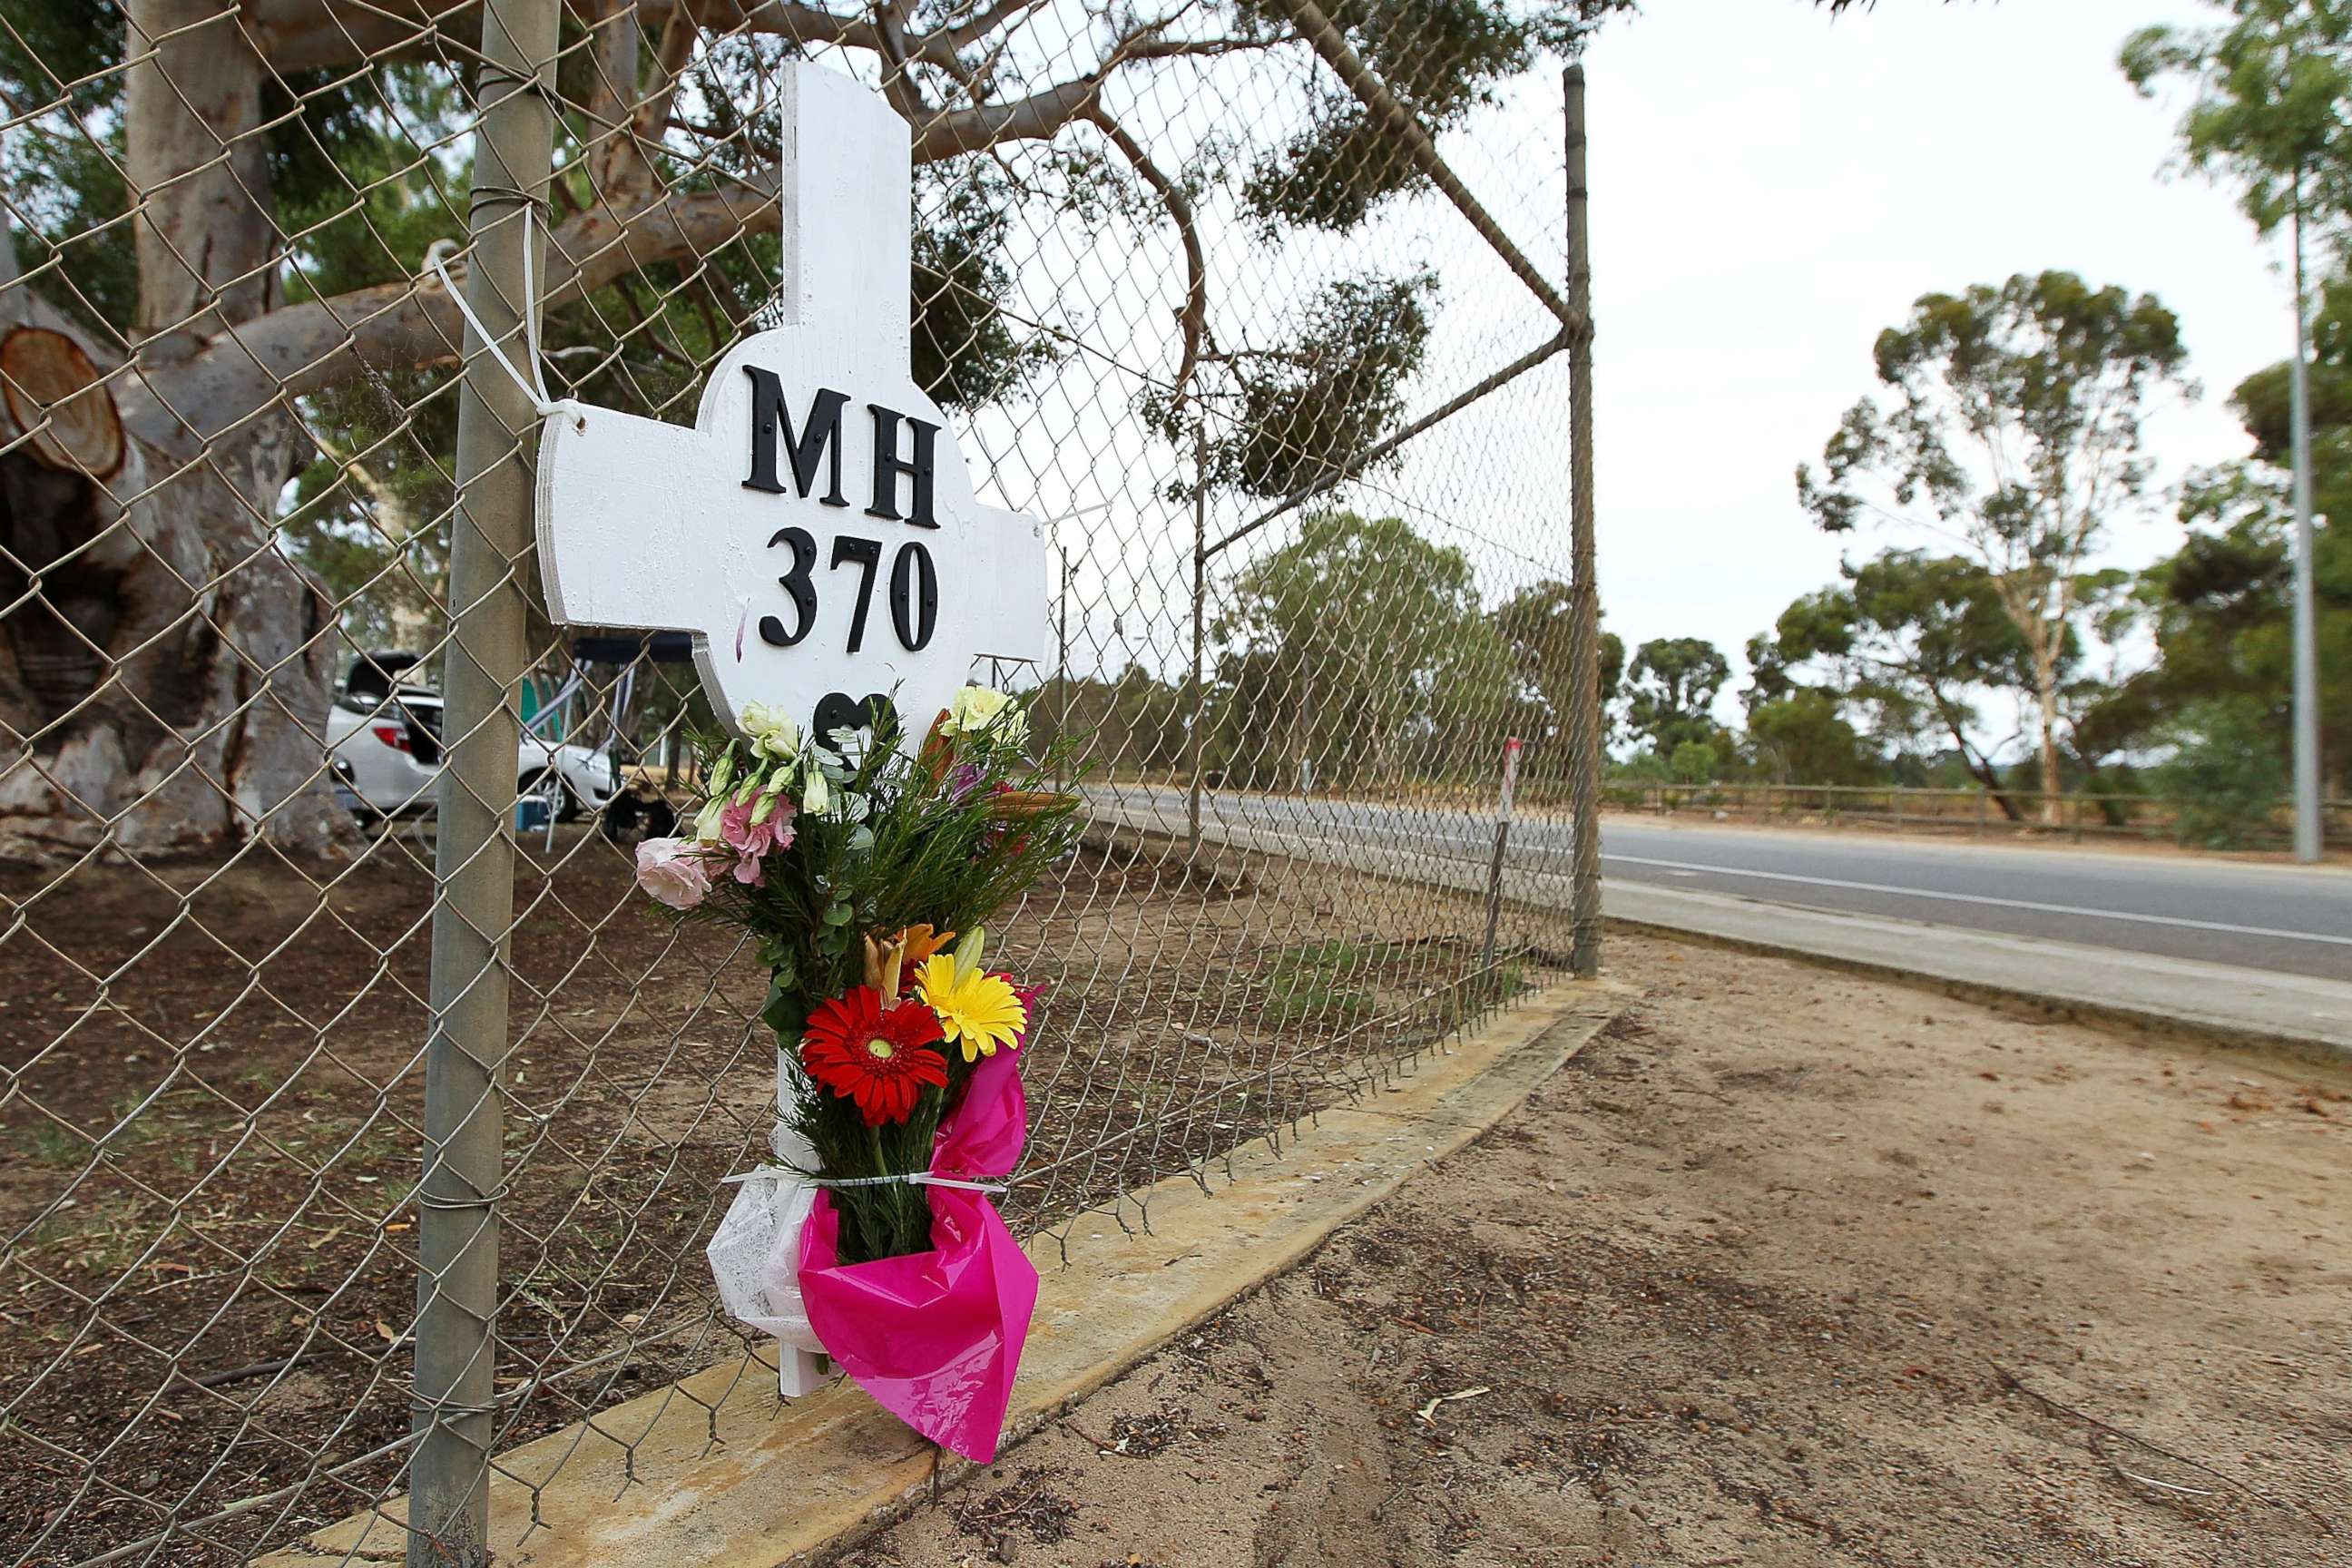 PHOTO: Flowers and a memorial for the missing passengers of flight MH370 are attached to the perimeter fence of RAAF Pearce Airbase on March 26, 2014 in Bullsbrook, 35km north of Perth, Australia.